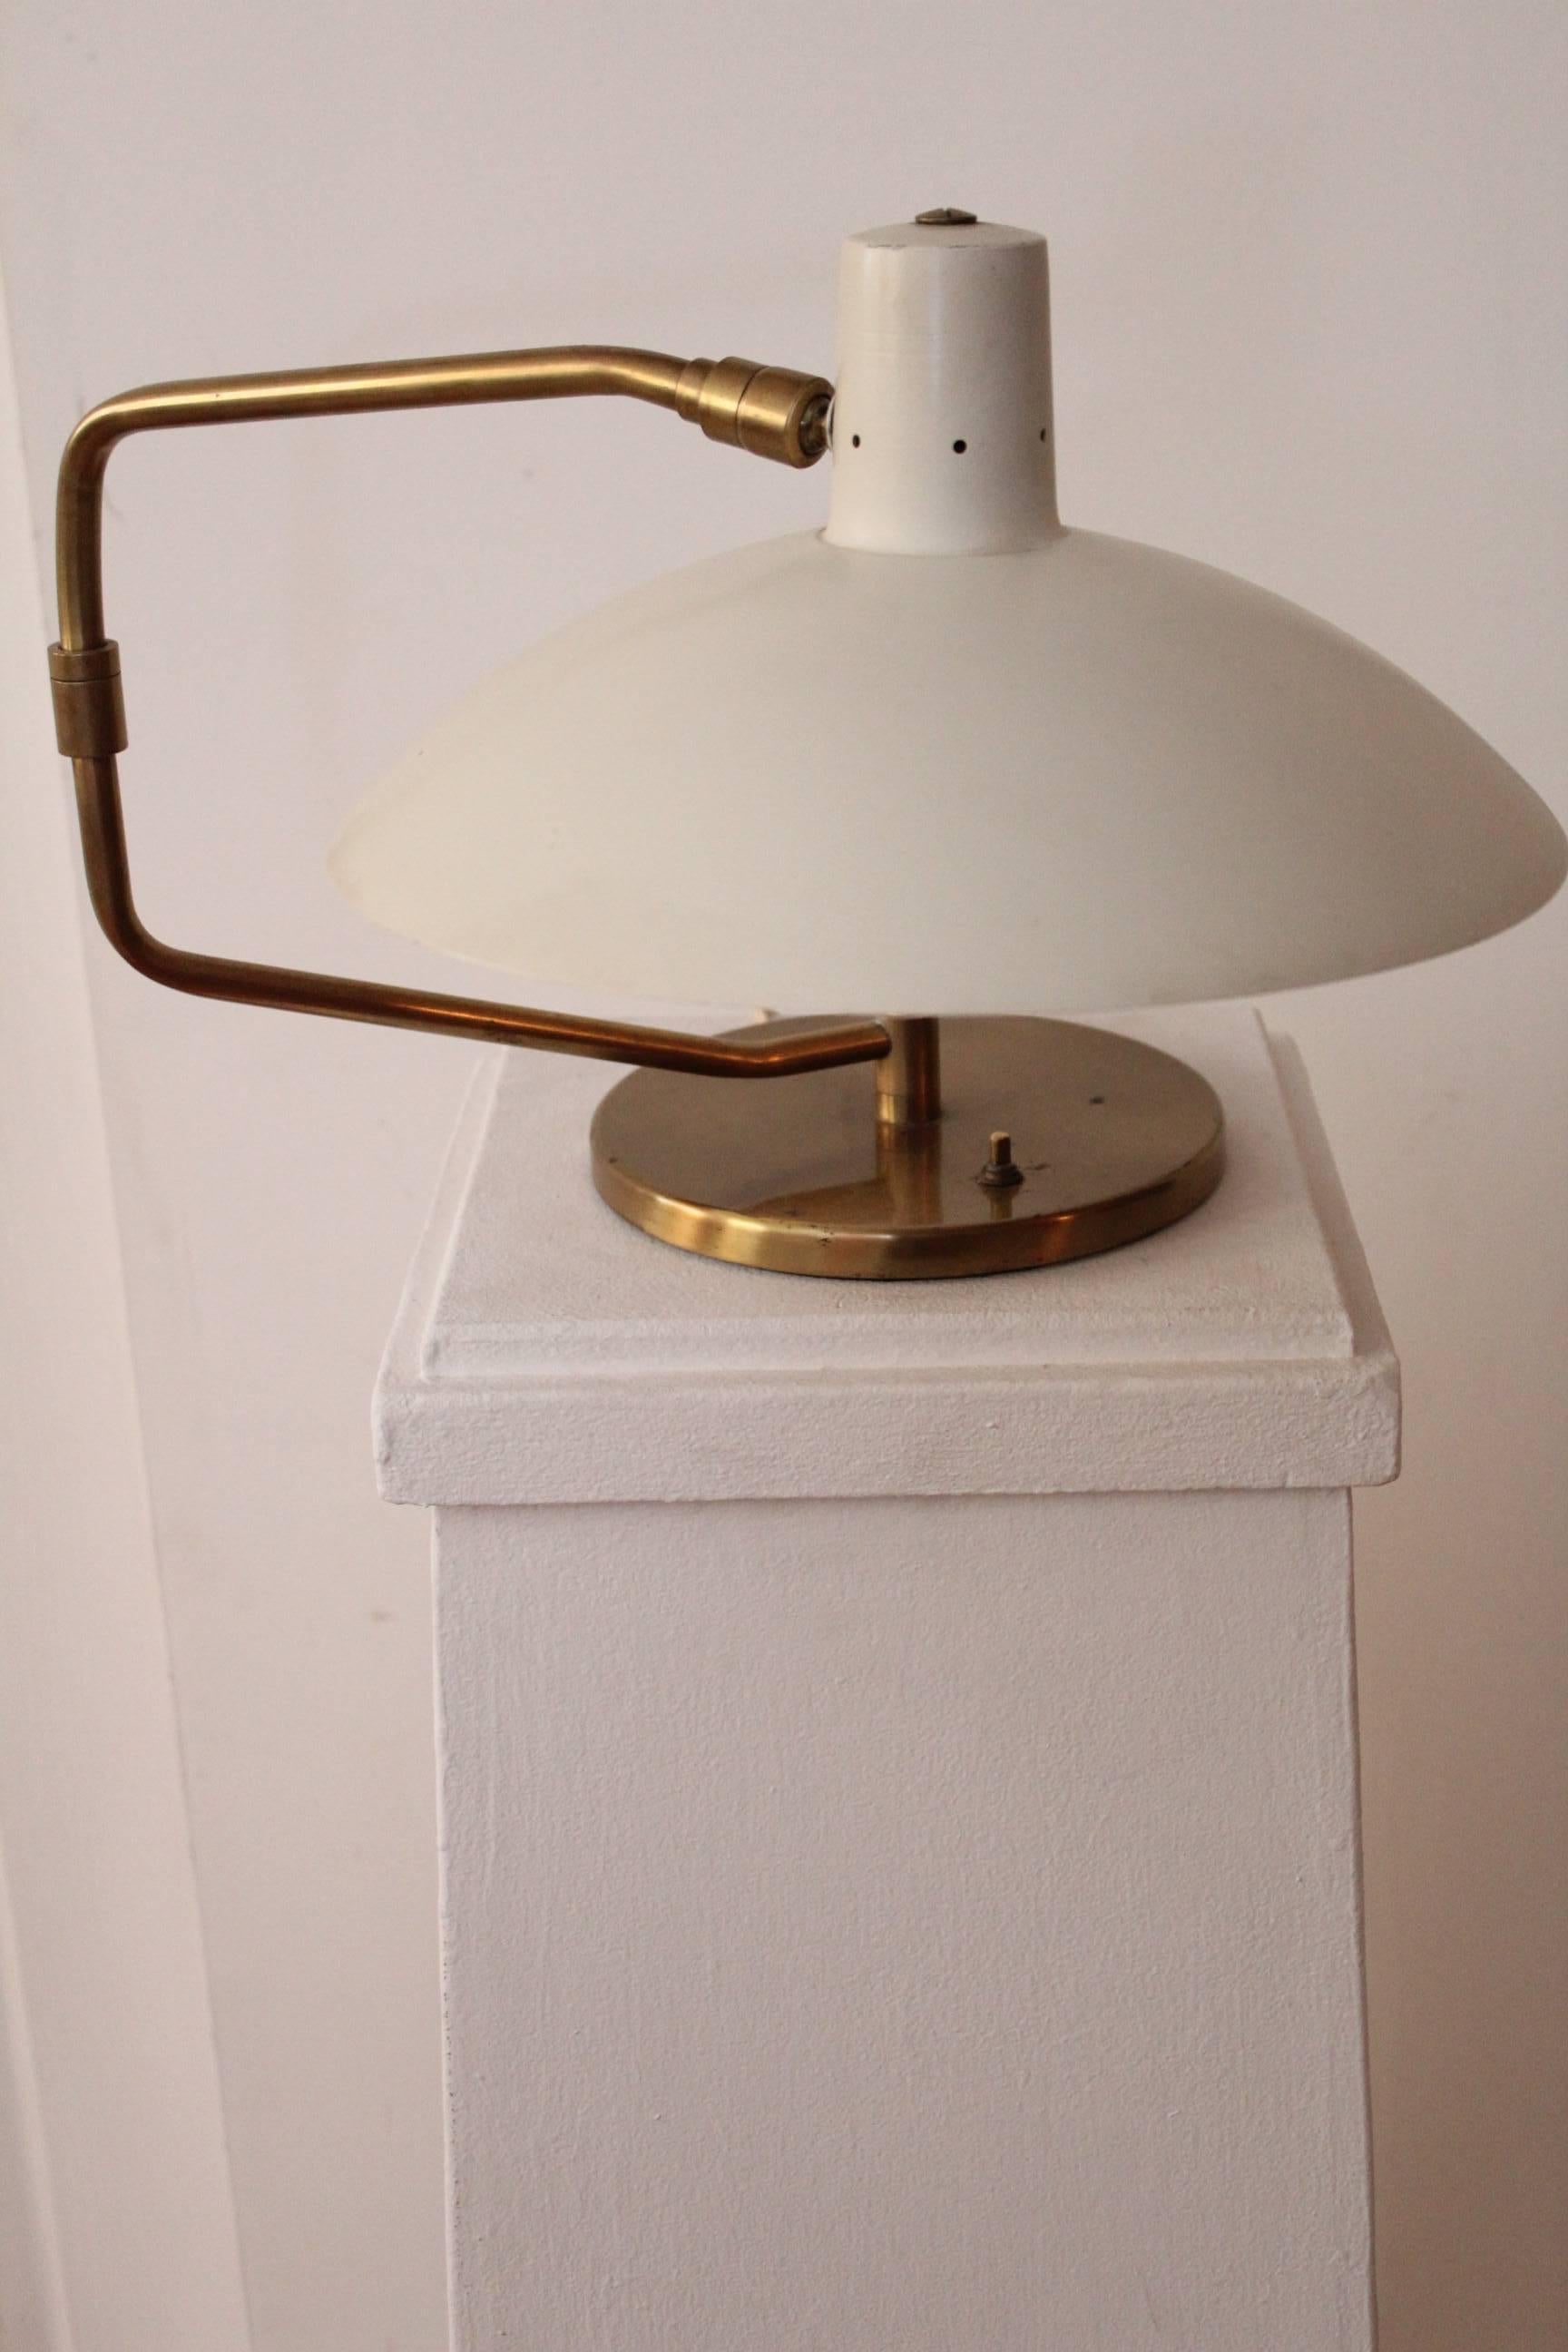 American Desk Lamp by Clay Michie